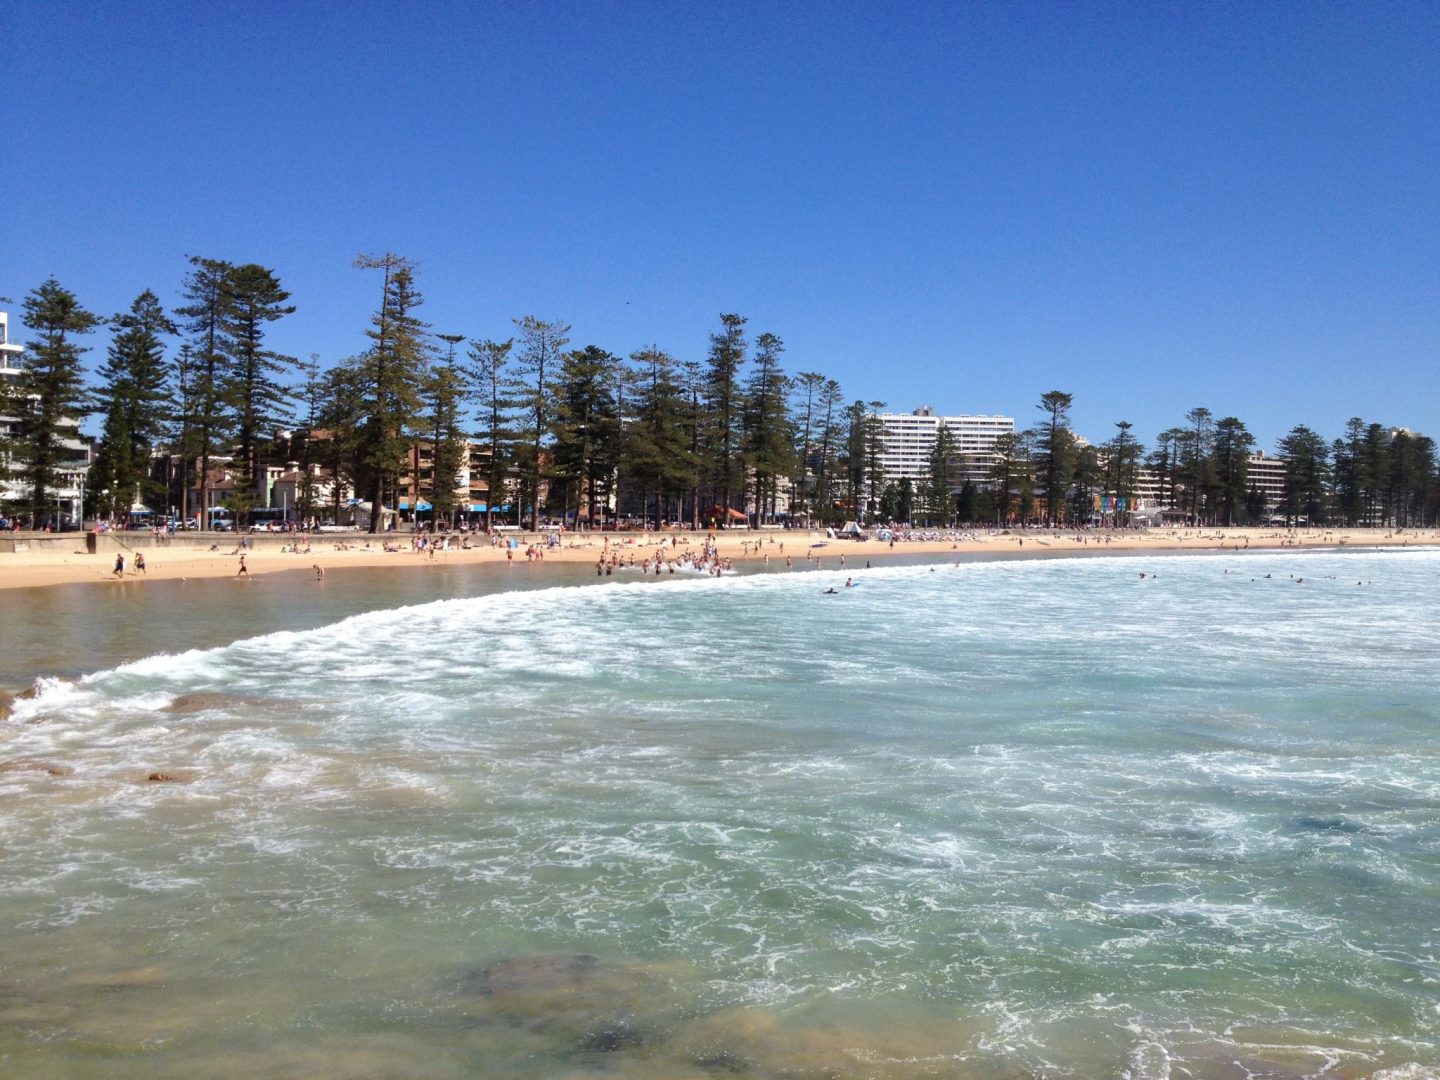 Manly Beach and its famous Norfolk Island pine trees